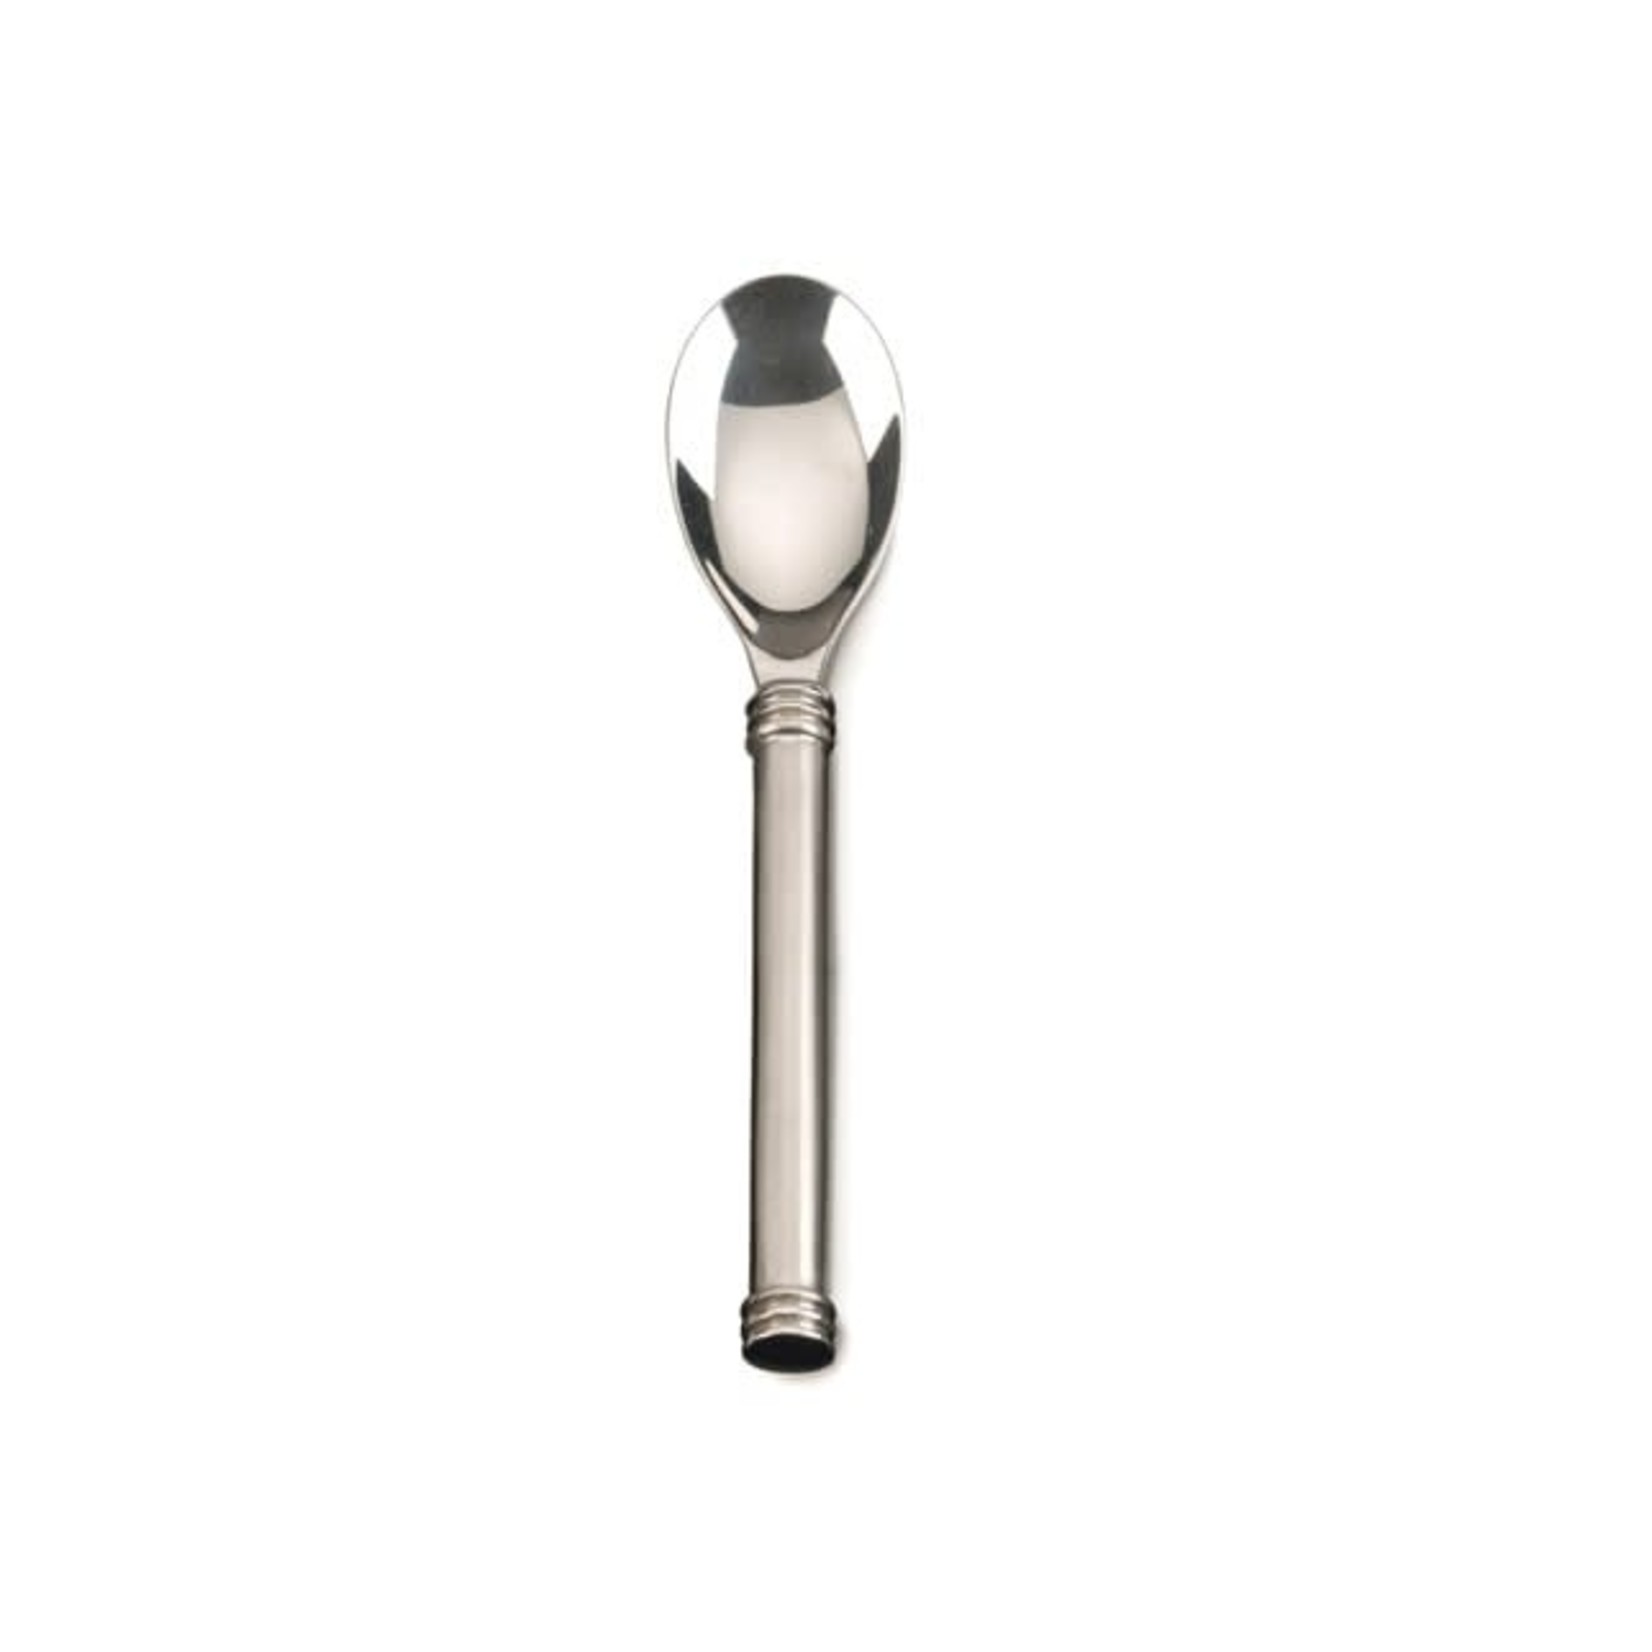 RSVP RSVP Cocktail Spoon - Stainless DNR